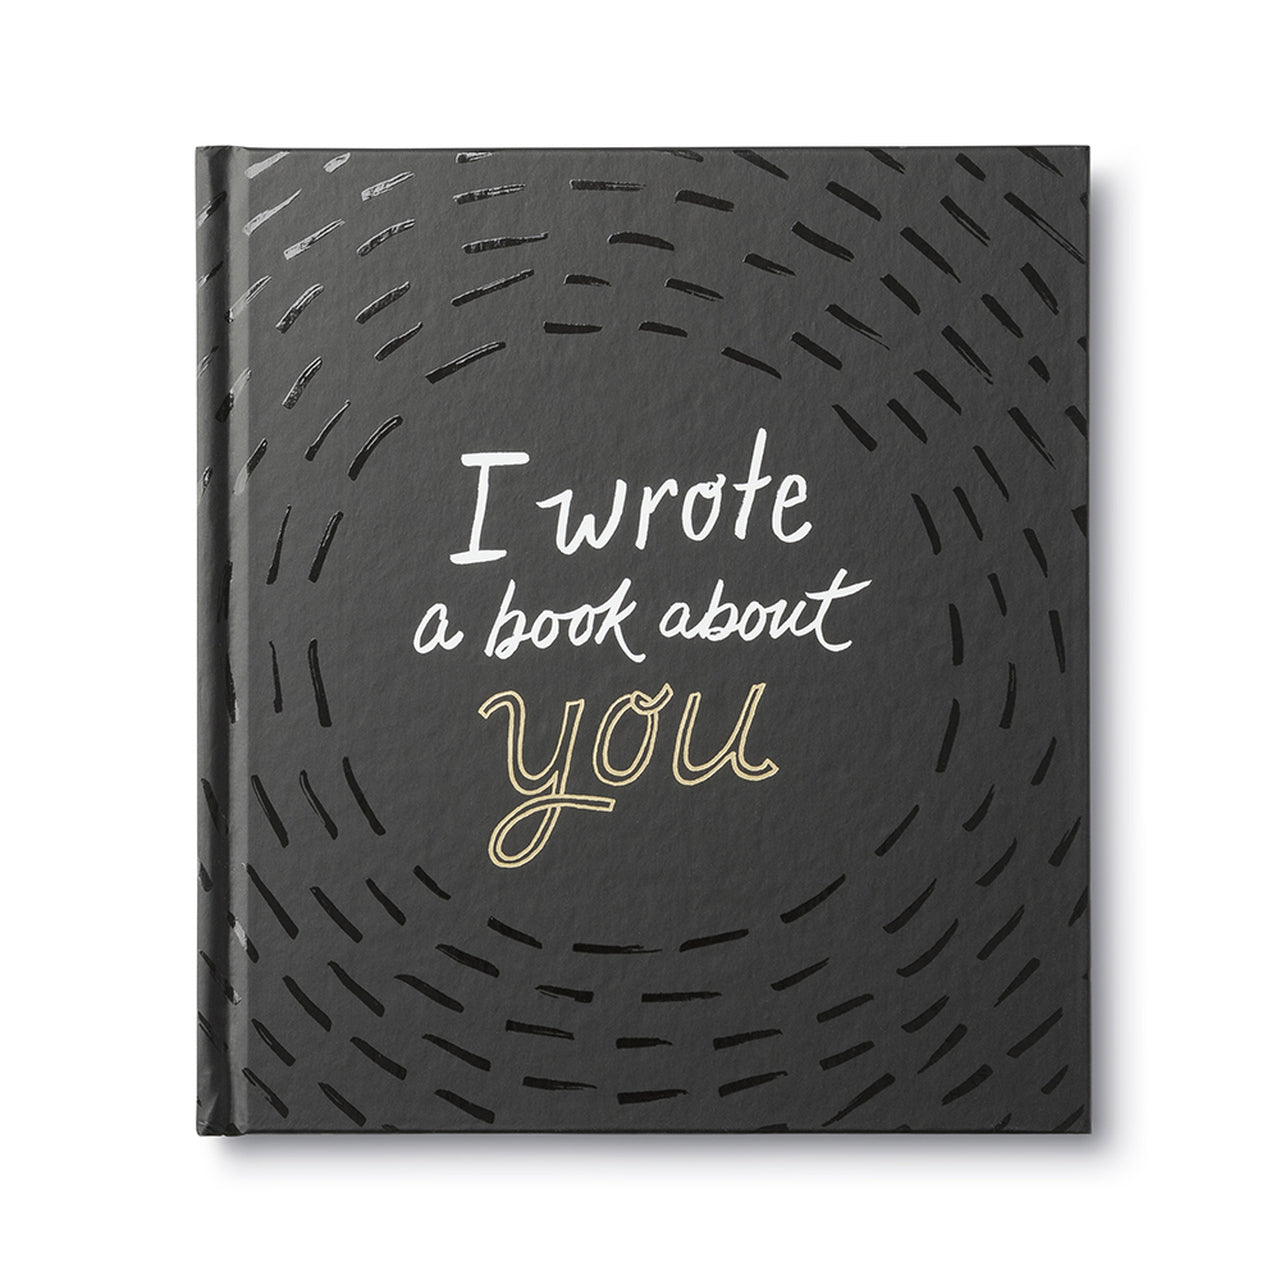 "I Wrote a Book about You" is a unique and memorable way to show someone you care. It has been specially designed for you to fill out and personalize, making it a truly one-of-a-kind gift. The fun questions and activities are sure to make it an enjoyable and meaningful experience for both of you! Give them a gift they'll never forget.  Features  Hardcover 8”H x 7.25”W 64 pages